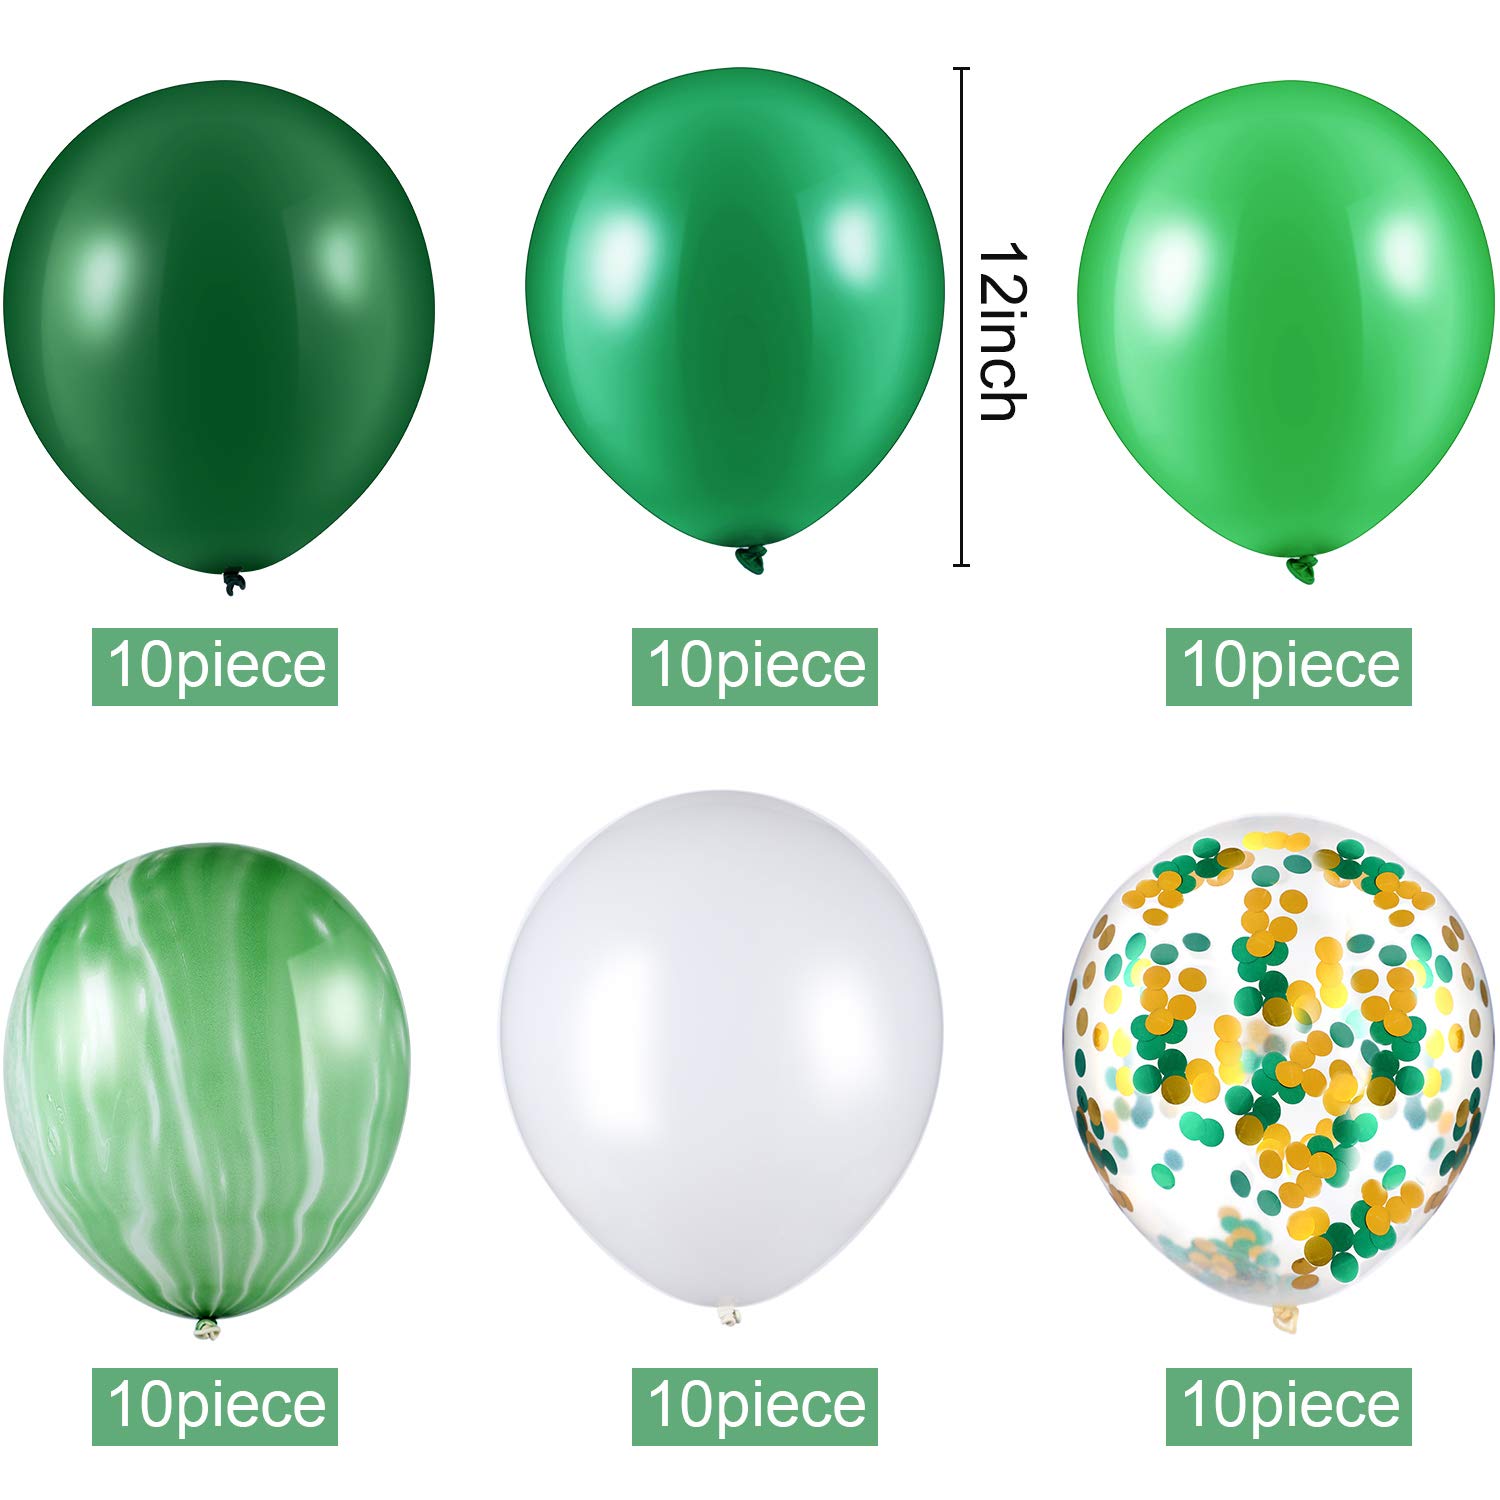 60 Pieces 12 Inch Agate Latex Balloons Confetti Balloons Colorful Balloons for Jungle Baby Shower Wedding Office Birthday Party Supplies (Green, White)